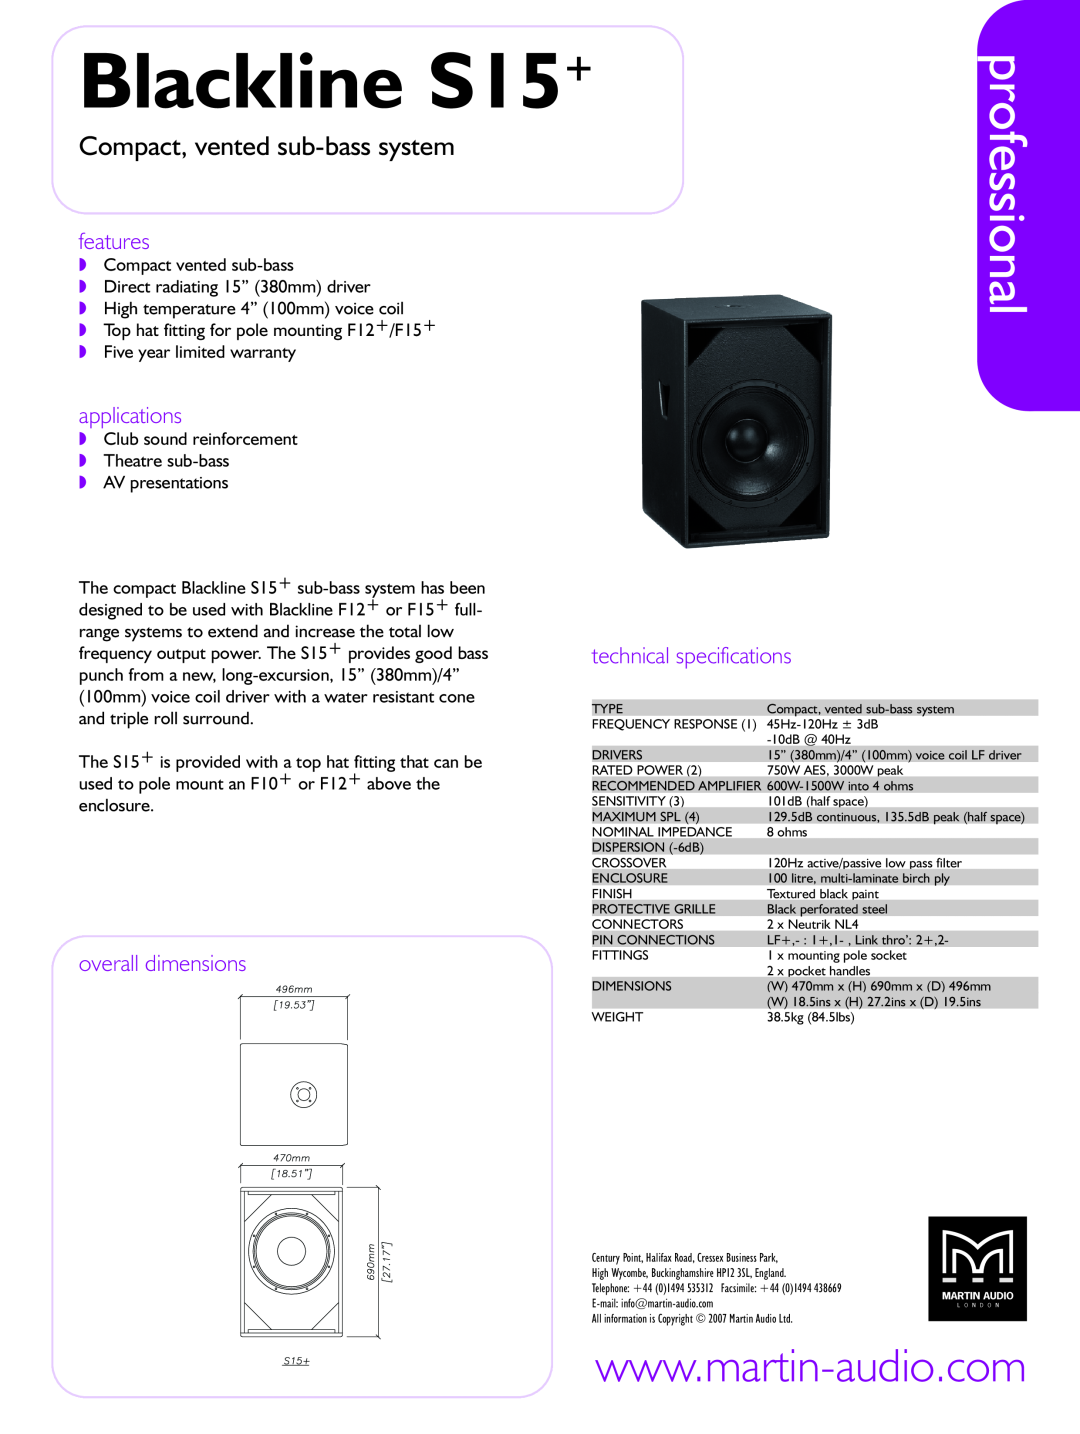 Martin Audio technical specifications Blackline S15+, professional, Compact, vented sub-bass system, features 